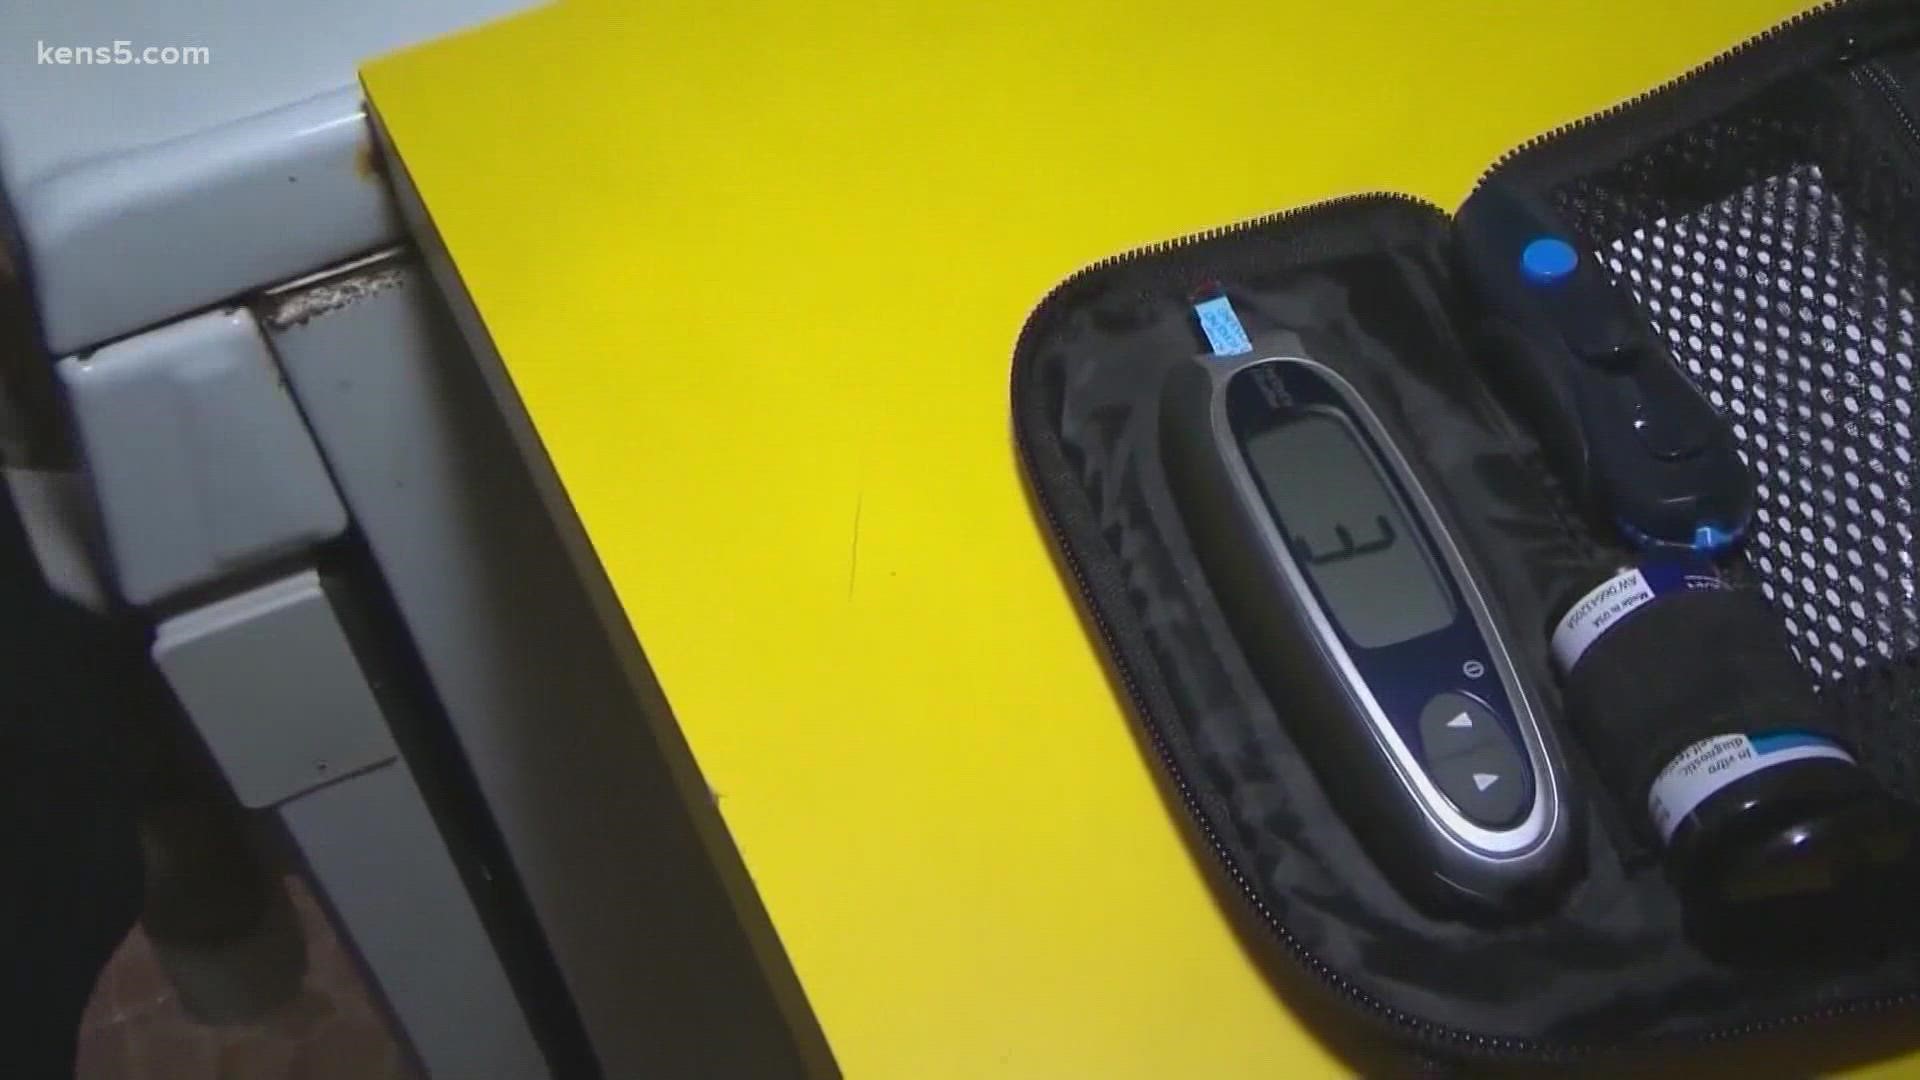 City leaders want to expand access to insulin, a critical medication in treating diabetes which affects more than 15% of Bexar County residents.